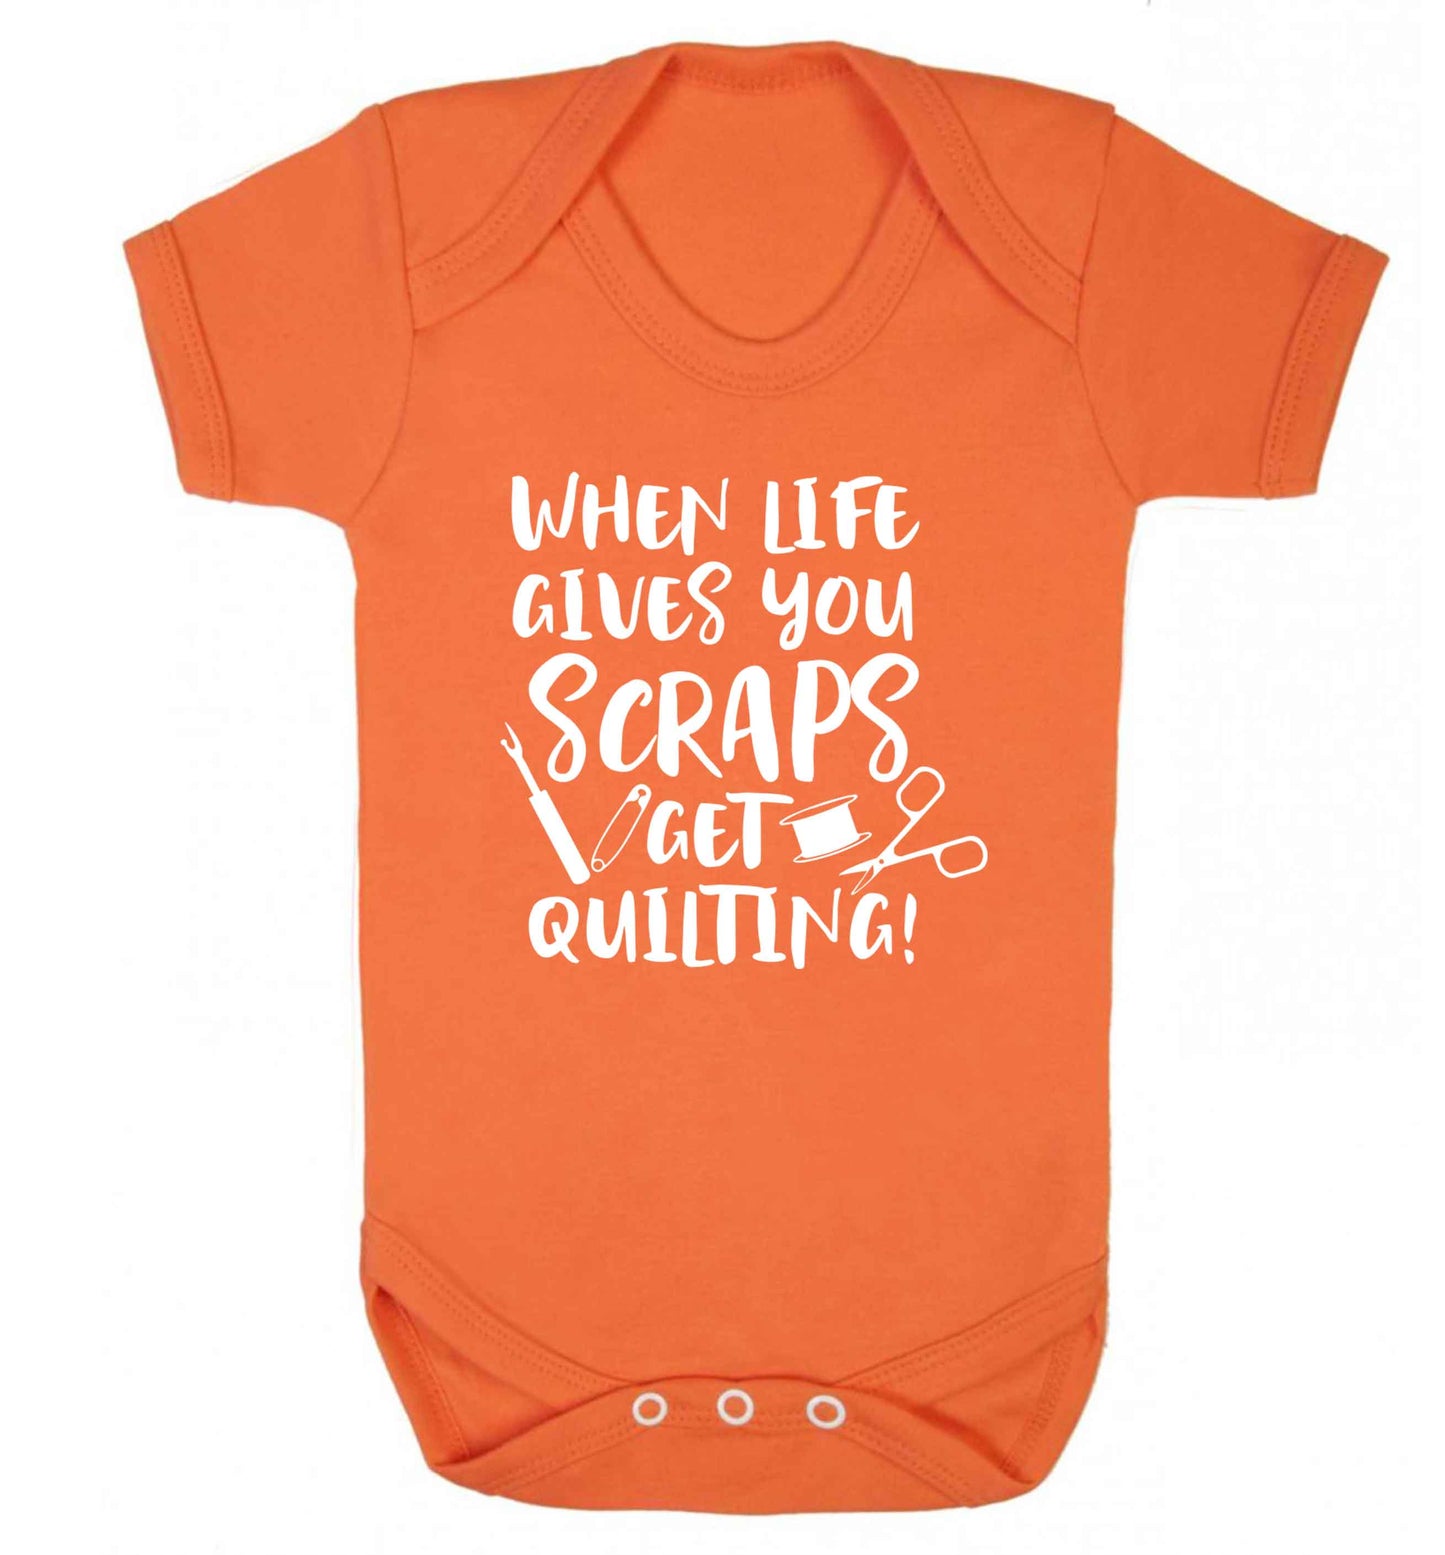 When life gives you scraps get quilting! Baby Vest orange 18-24 months